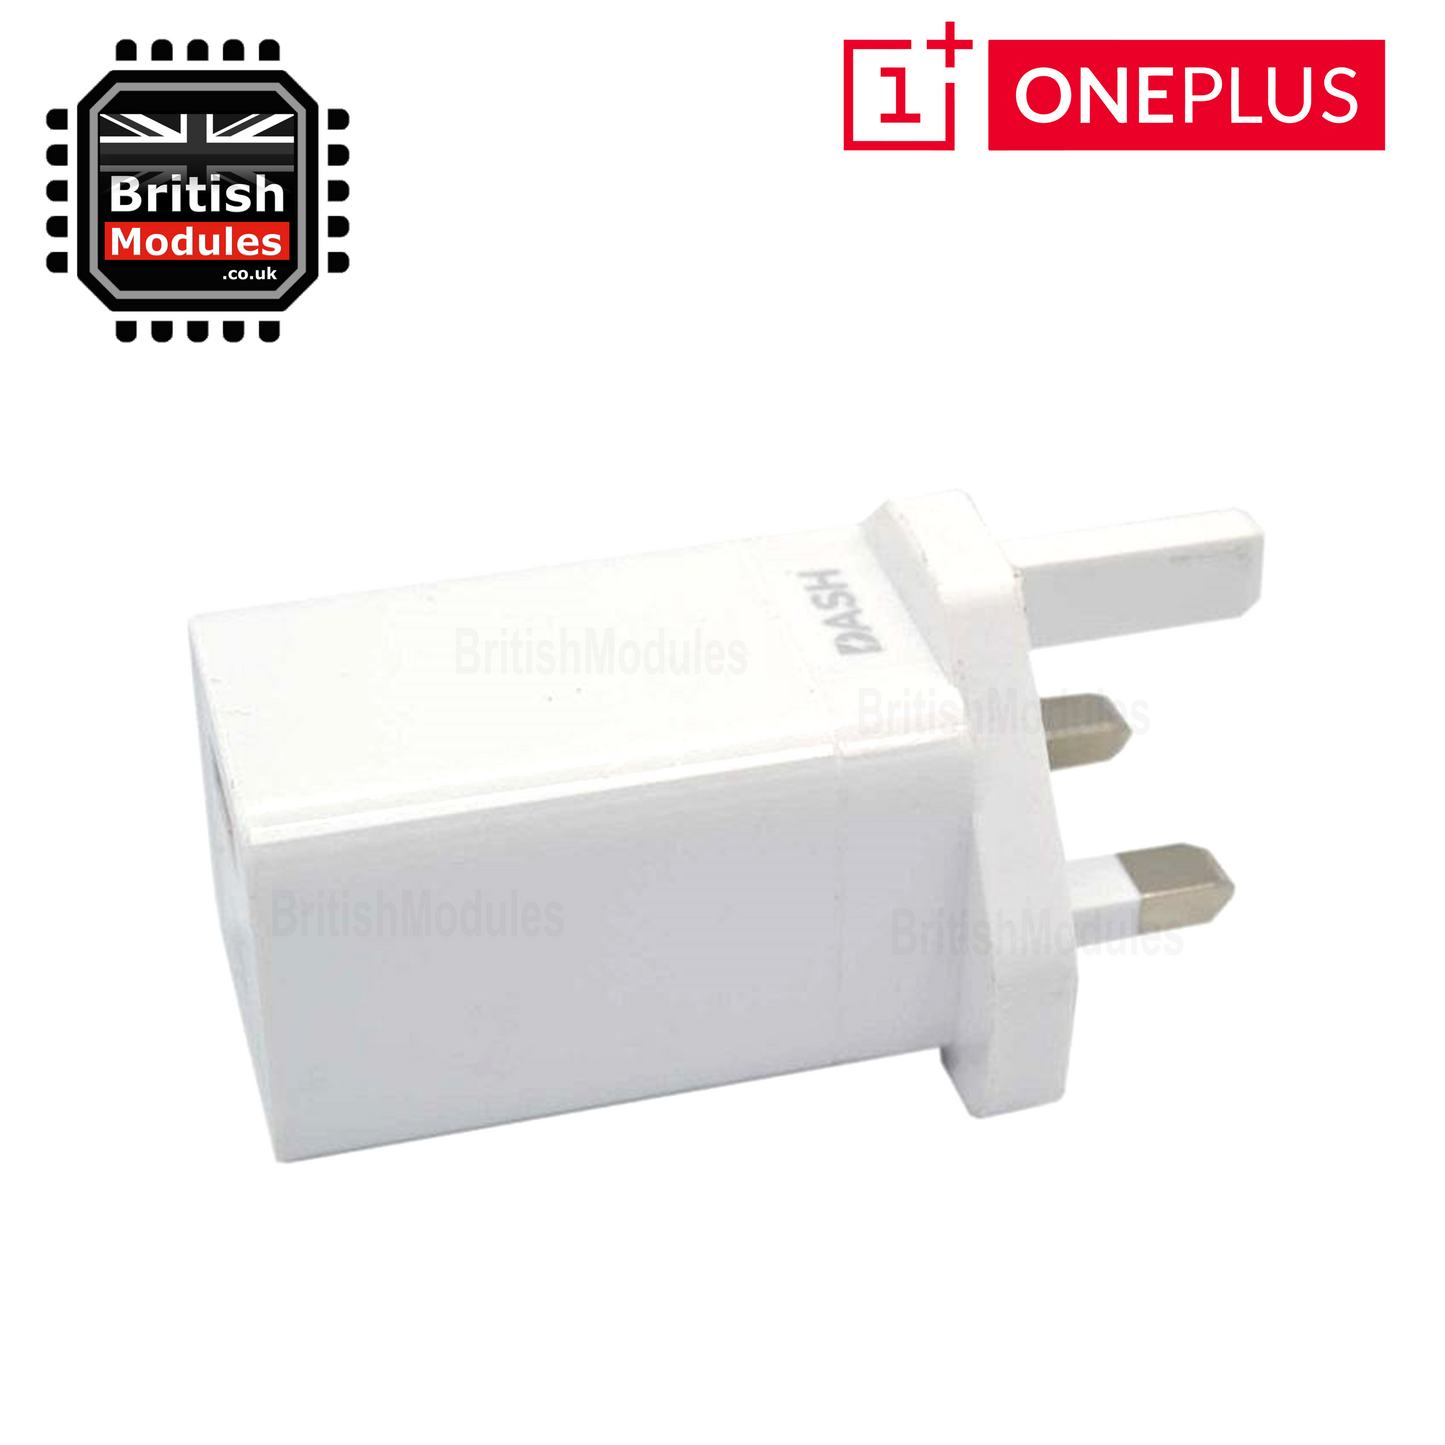 OnePlus Dash High Speed Original Charger Power Adapter UK Plug for OnePlus 6T 6 5T 5 3T 3 2